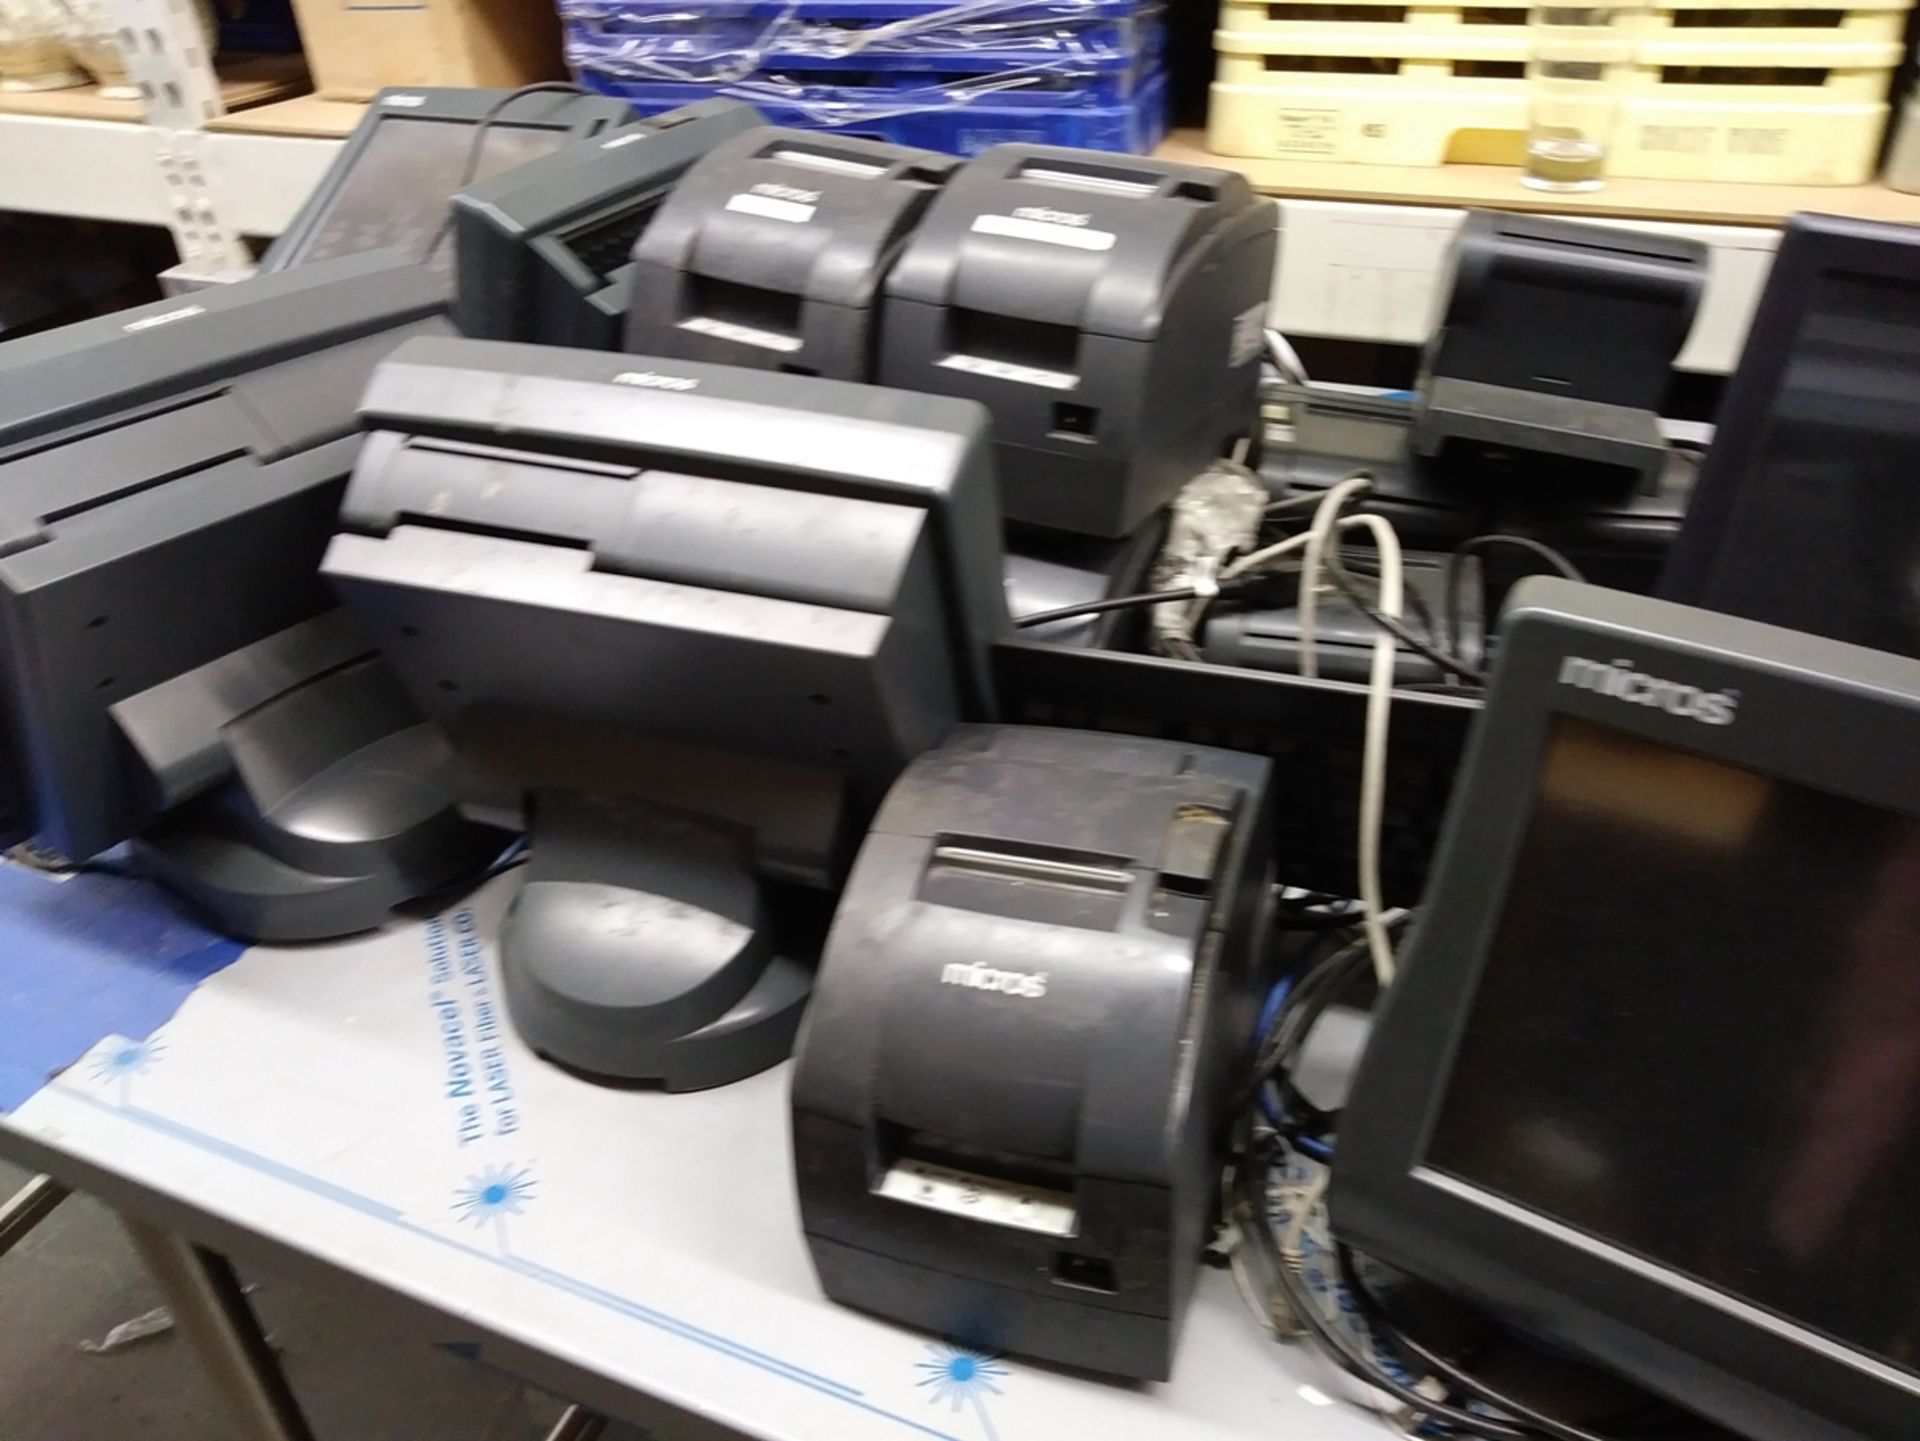 ENTIRE POS SYSTEM - INCLUDES 6 MICROS TOUCHSCREEN MONITORS, 12 RECEIPT PRINTERS, 2 CASH DRAWERS - Image 4 of 5